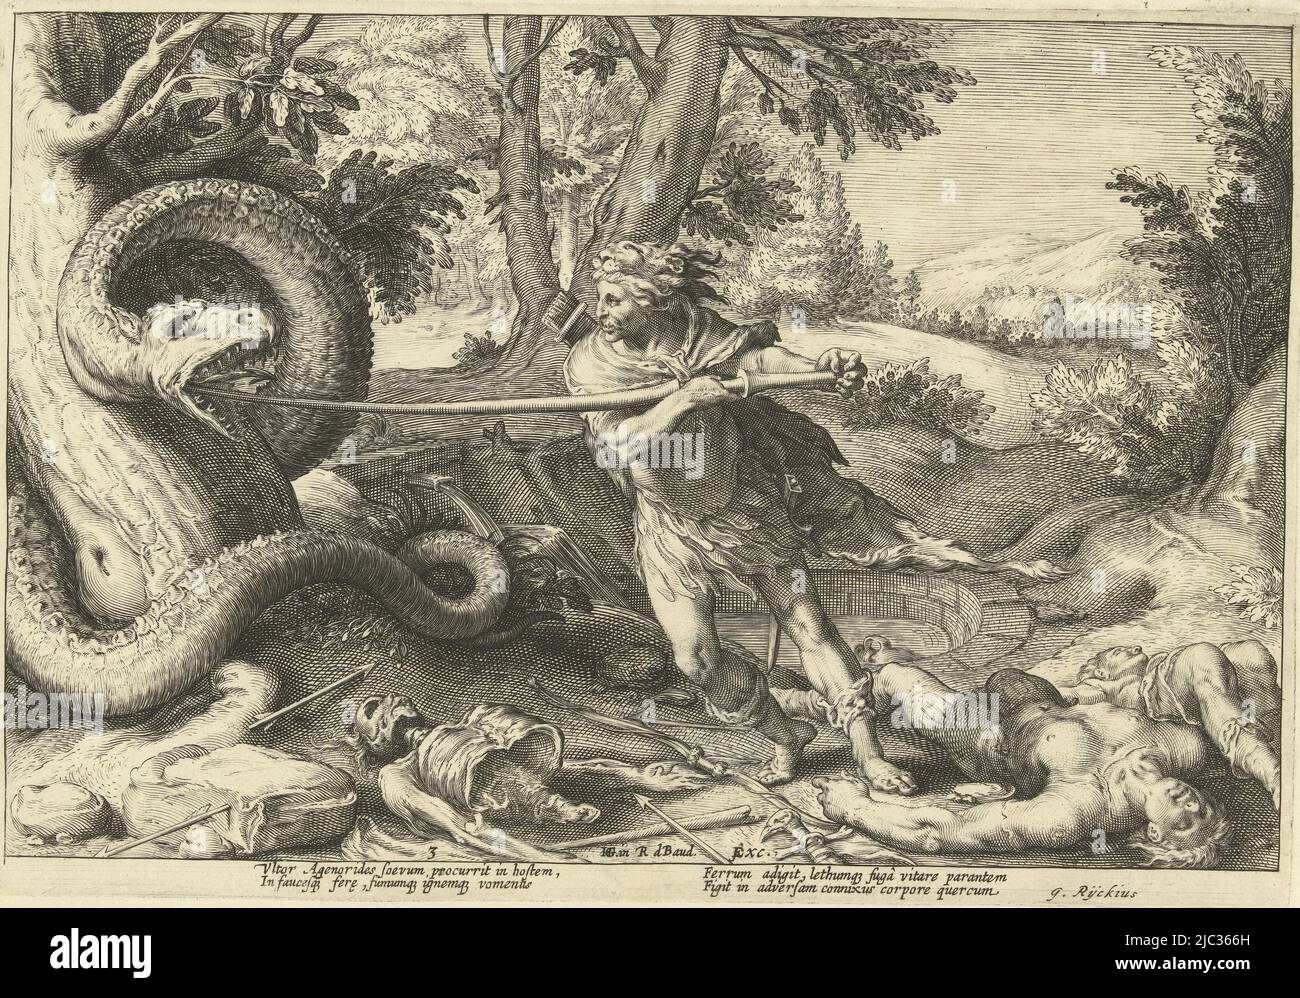 Cadmus kills the dragon that devoured his companions. Below the depiction two times two lines of Latin text. This print is part of a series of 52 prints depicting stories from Ovid's Metamorphoses. This series is divided into three numbered series: two of 20 prints and one of 12 prints. This print belongs to the third series, Cadmus slays the dragon Ovid's Metamorphoses (series title), print maker: Hendrick Goltzius, (workshop of), print maker: Robert de Baudous, (workshop of), Hendrick Goltzius, (mentioned on object), print maker: Haarlem, print maker: Netherlands, publisher: Netherlands Stock Photo